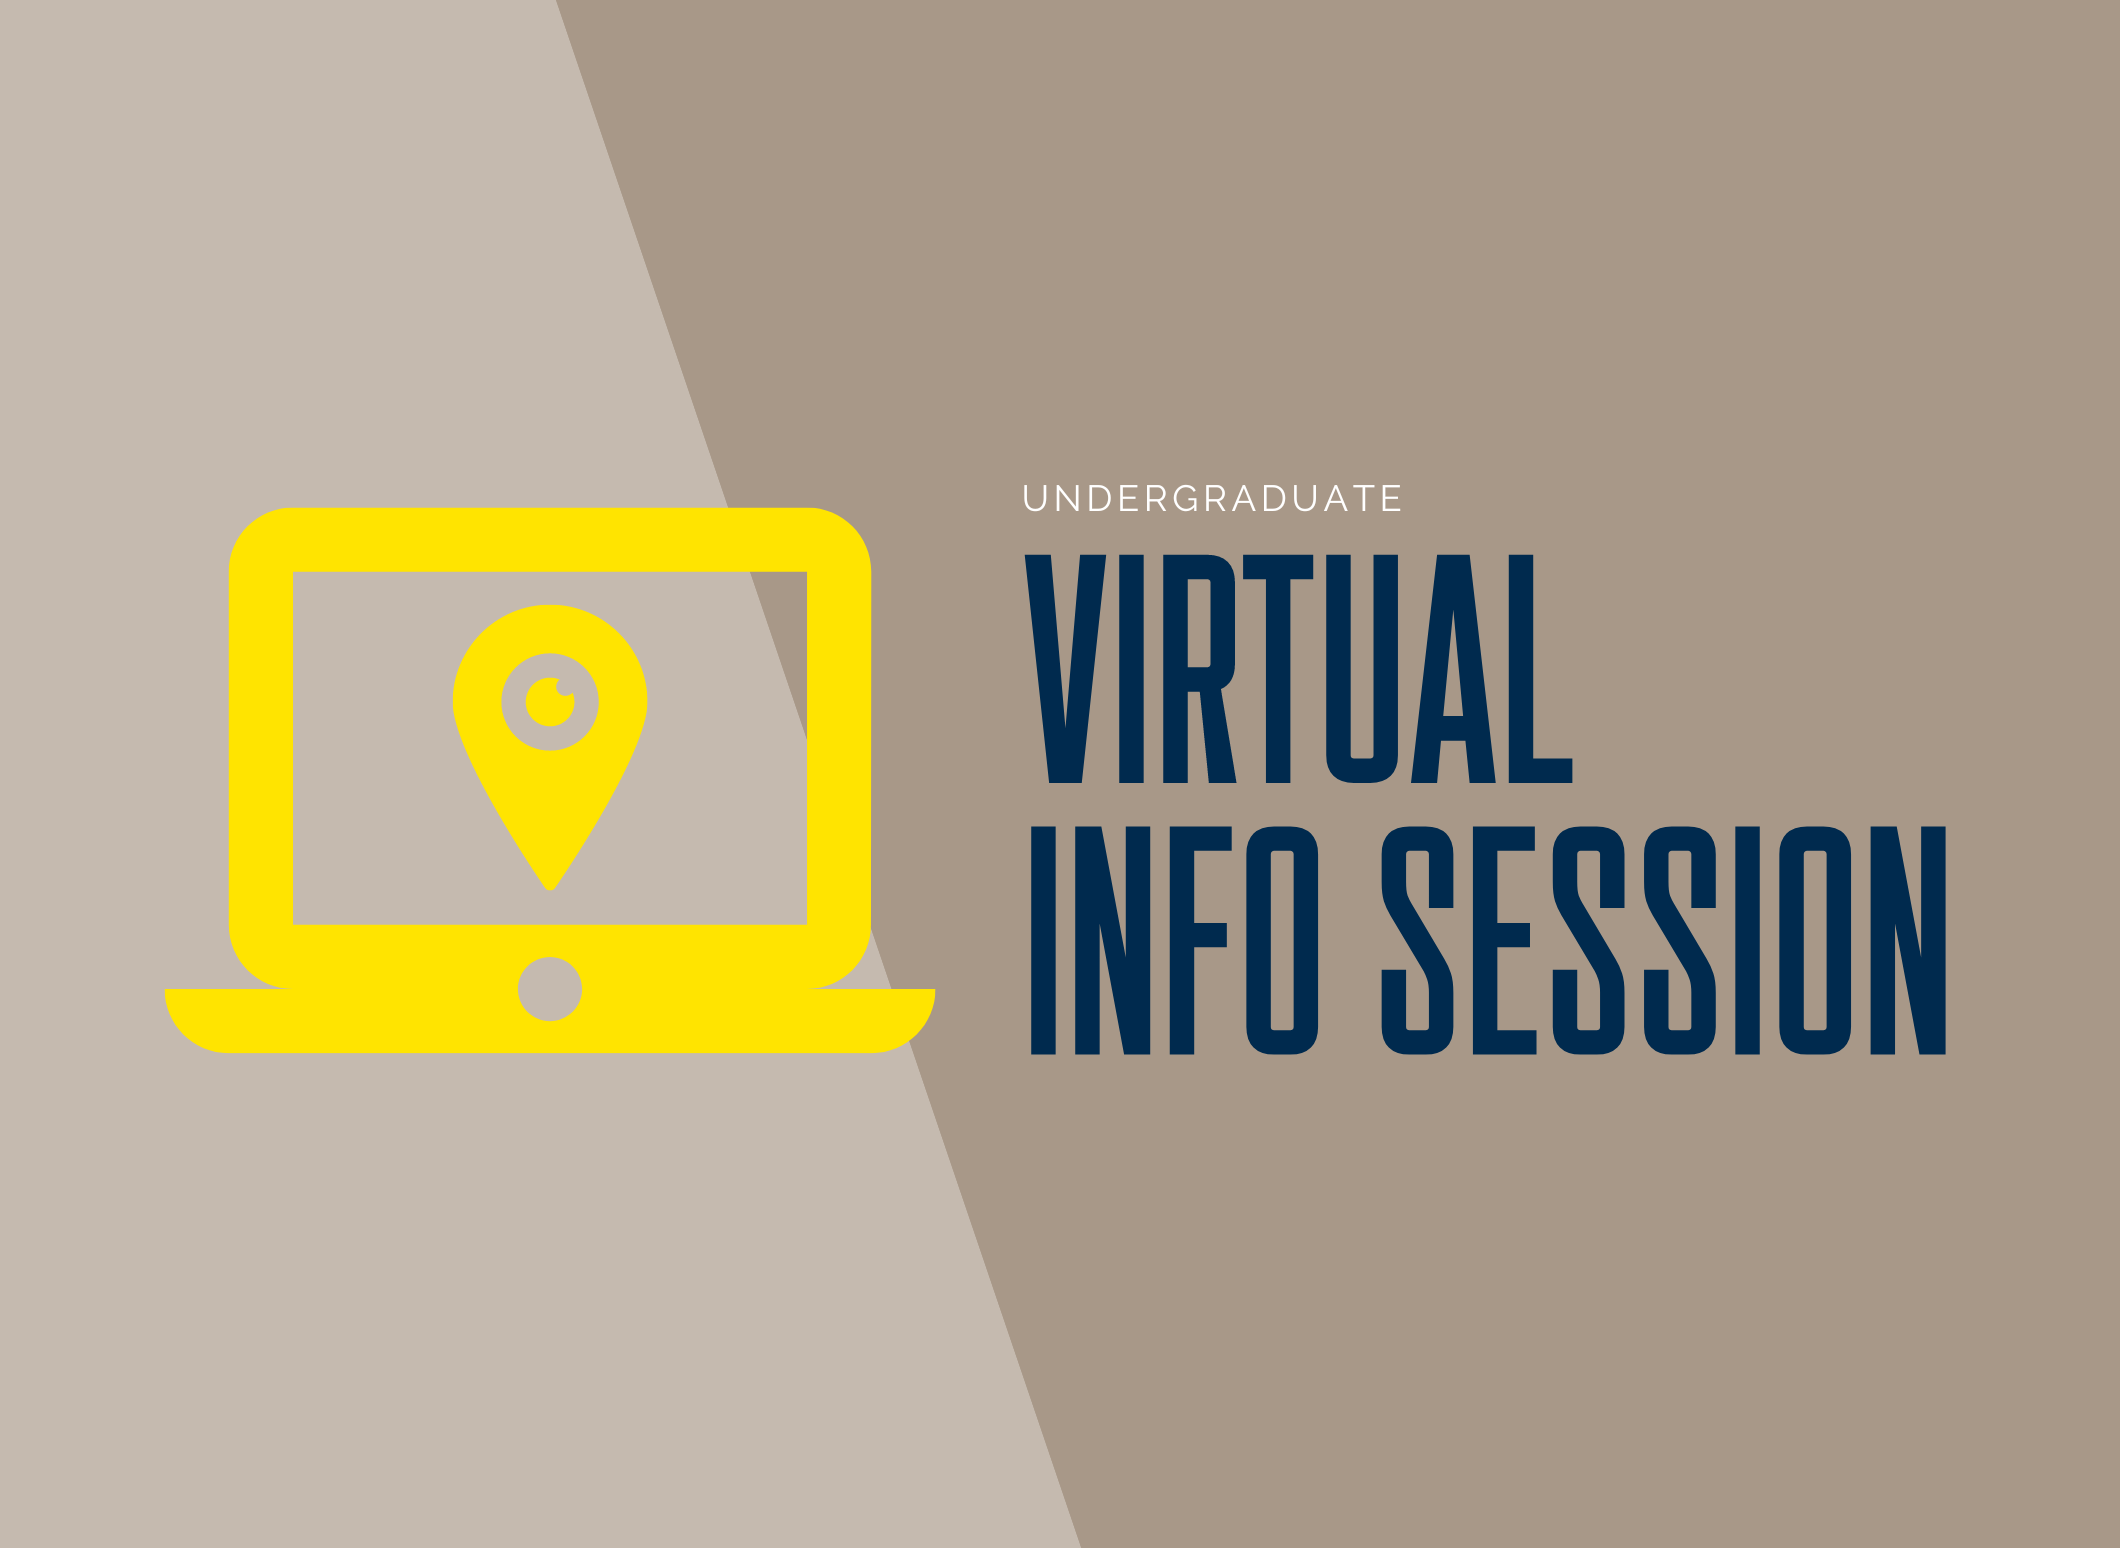 Virtual information session graphic